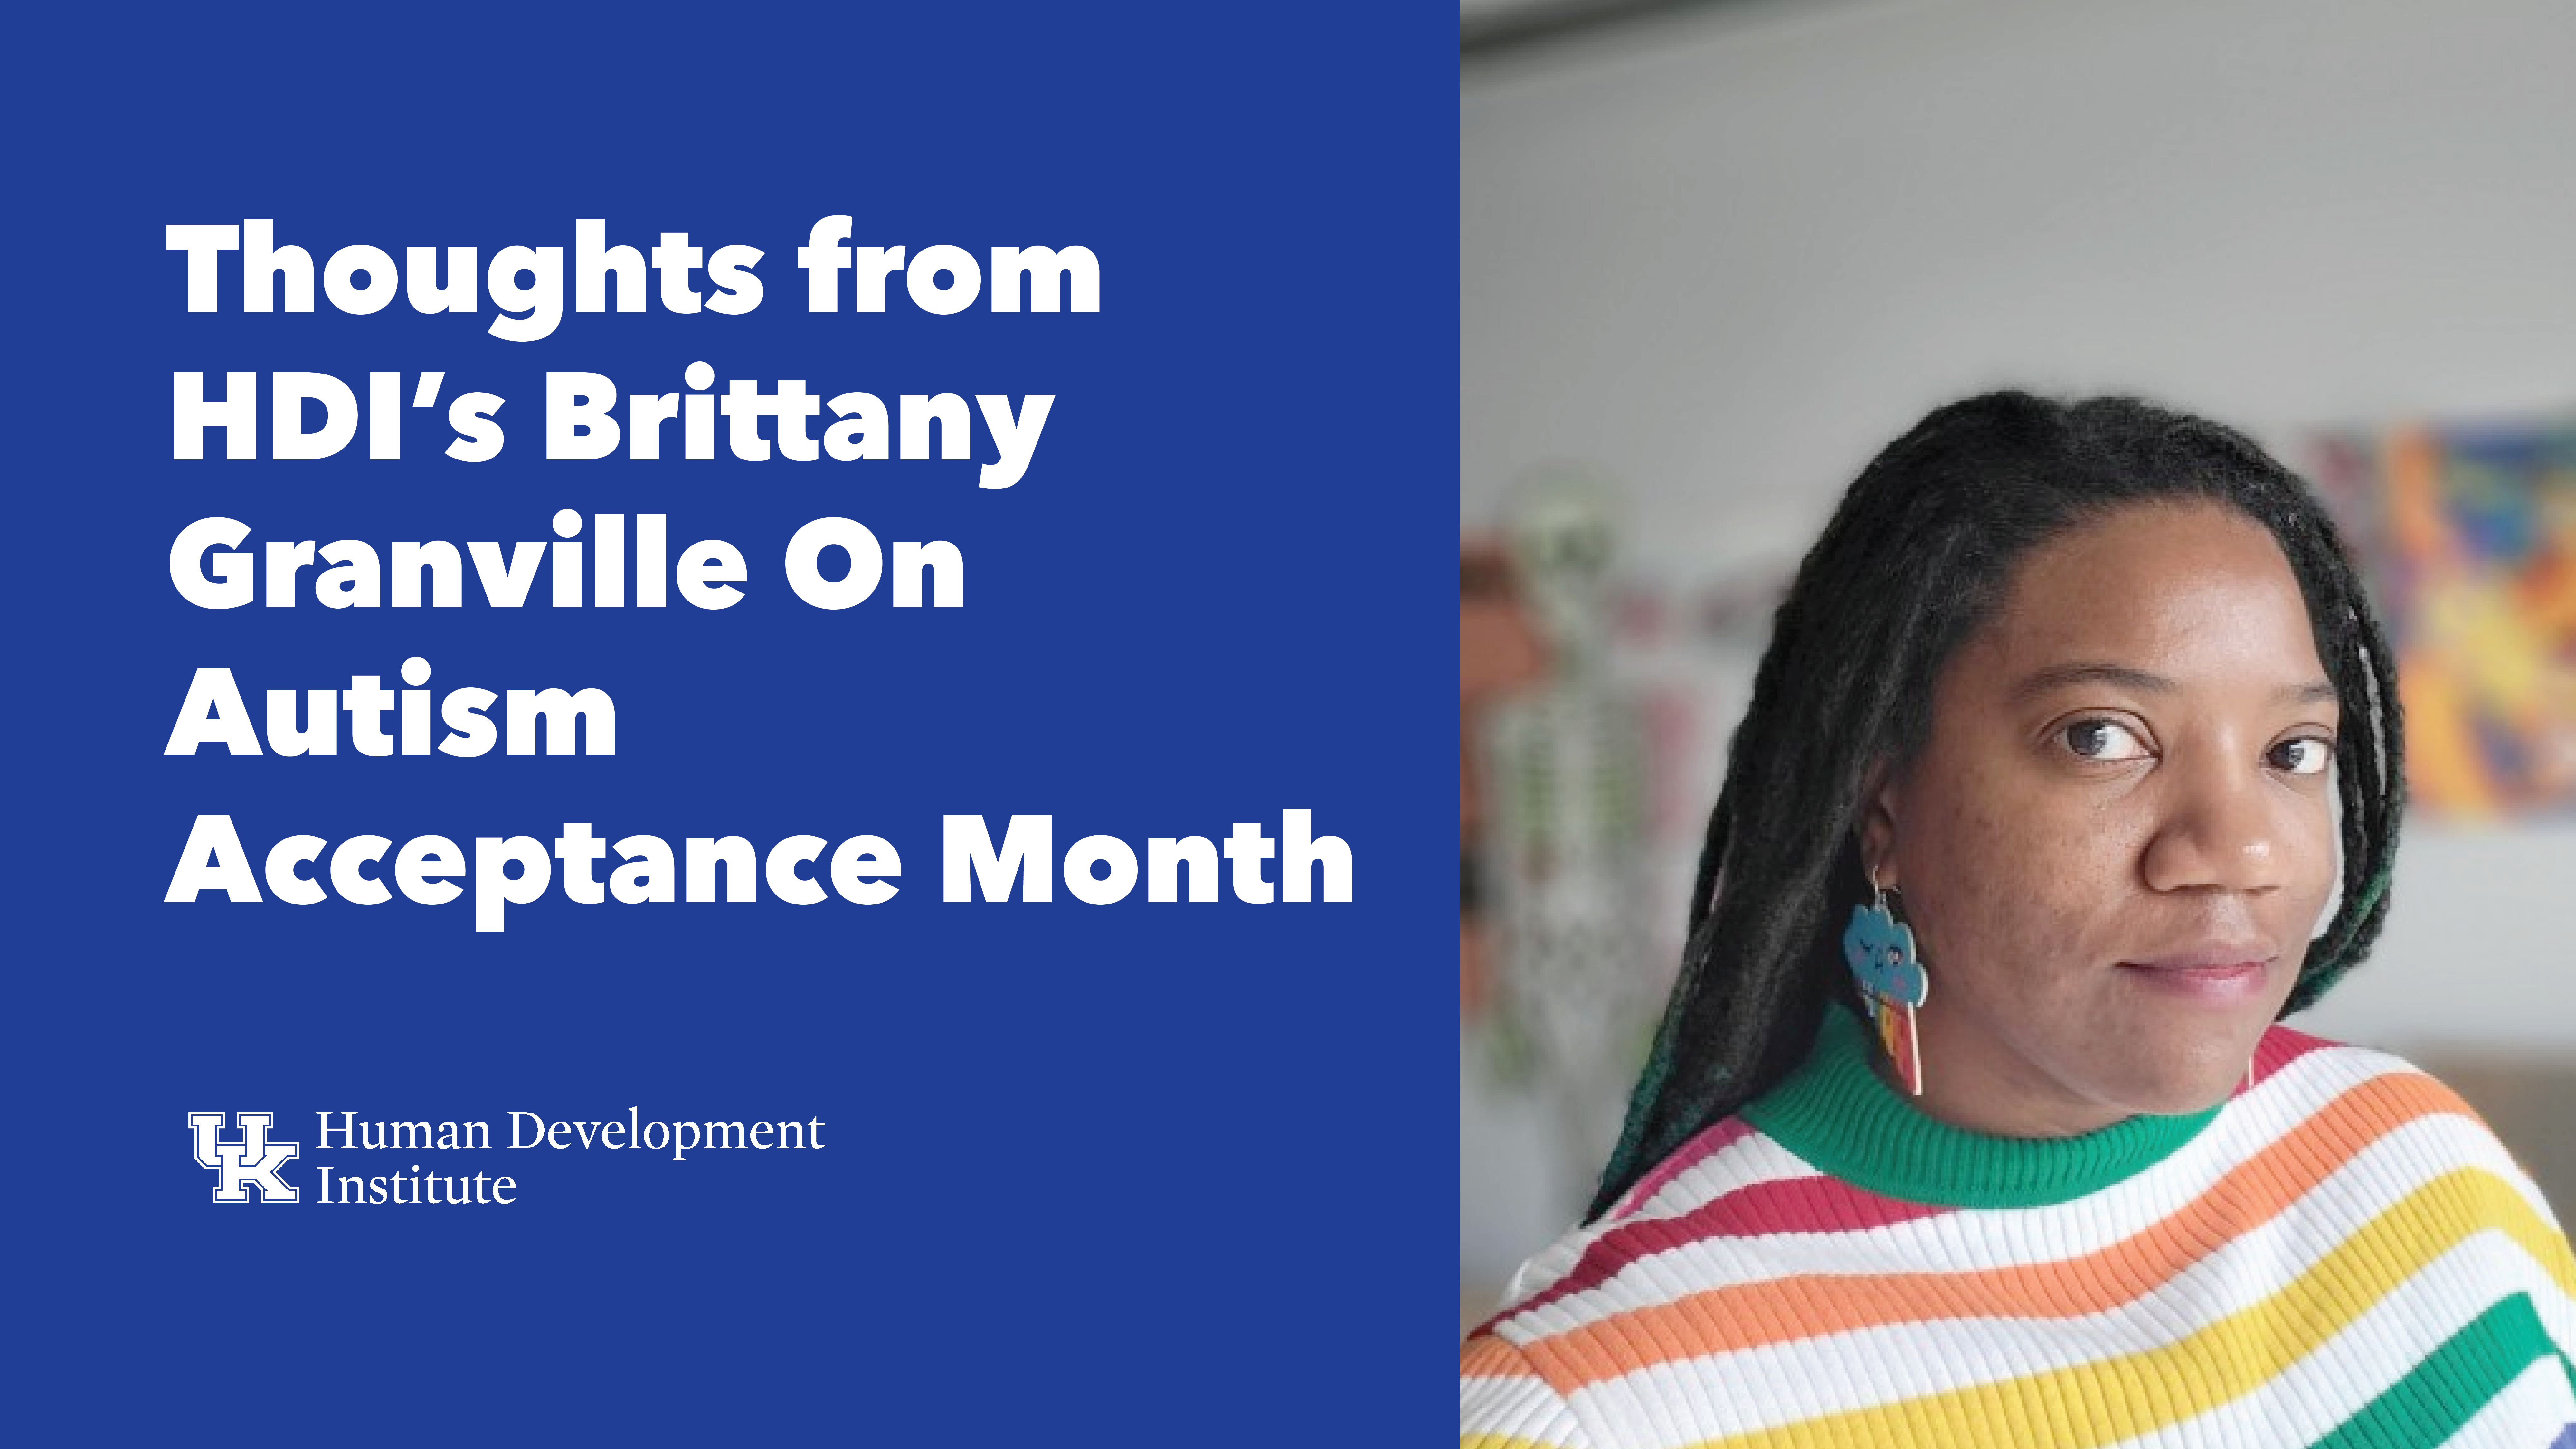 Thoughts from HDI’s Brittany Granville On Autism Acceptance Month